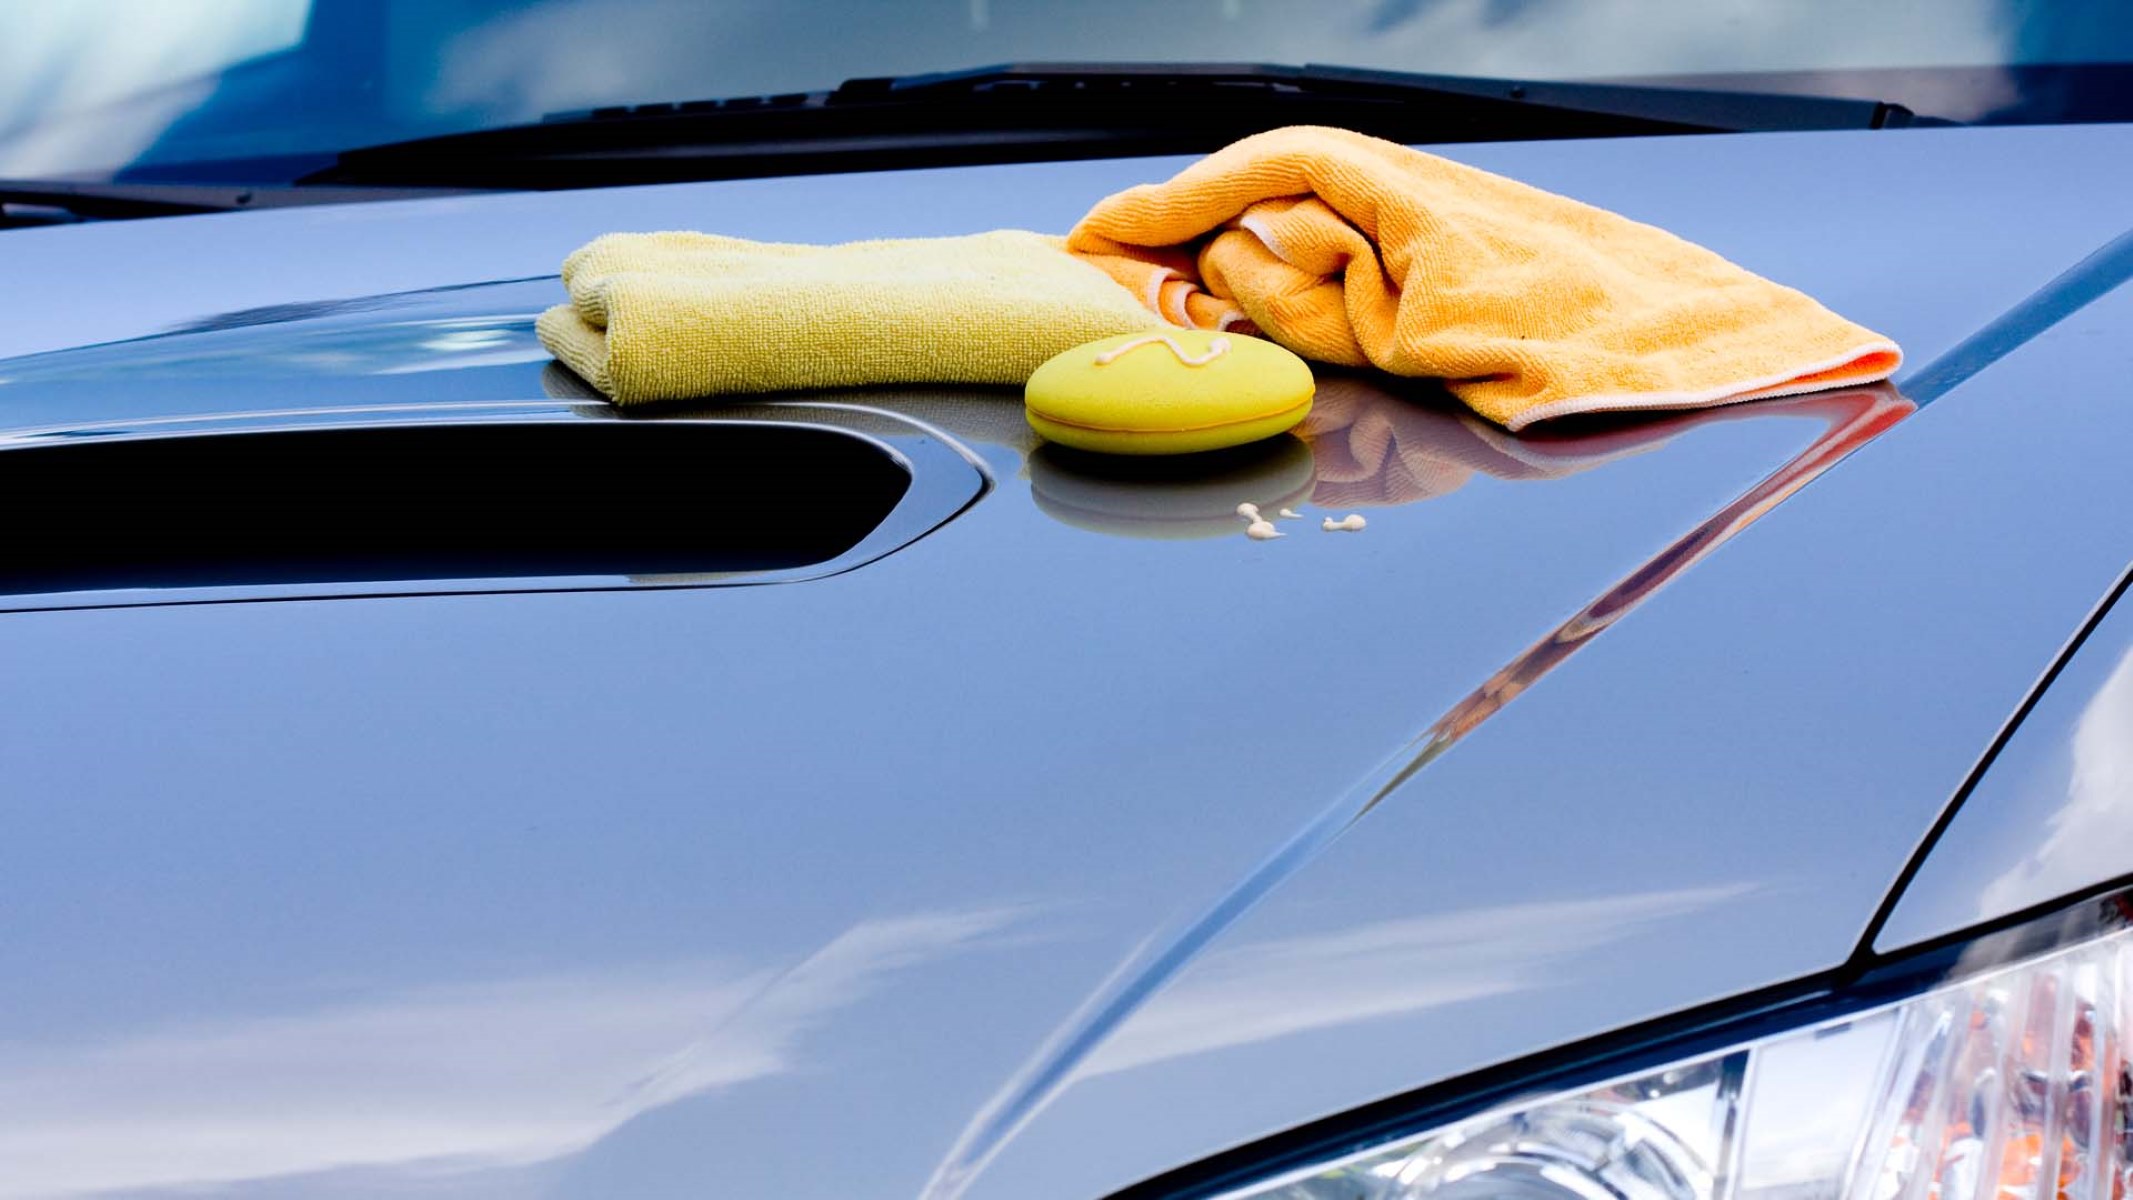 How To Remove Deodorizer From Car That Care Rental Agencies Use